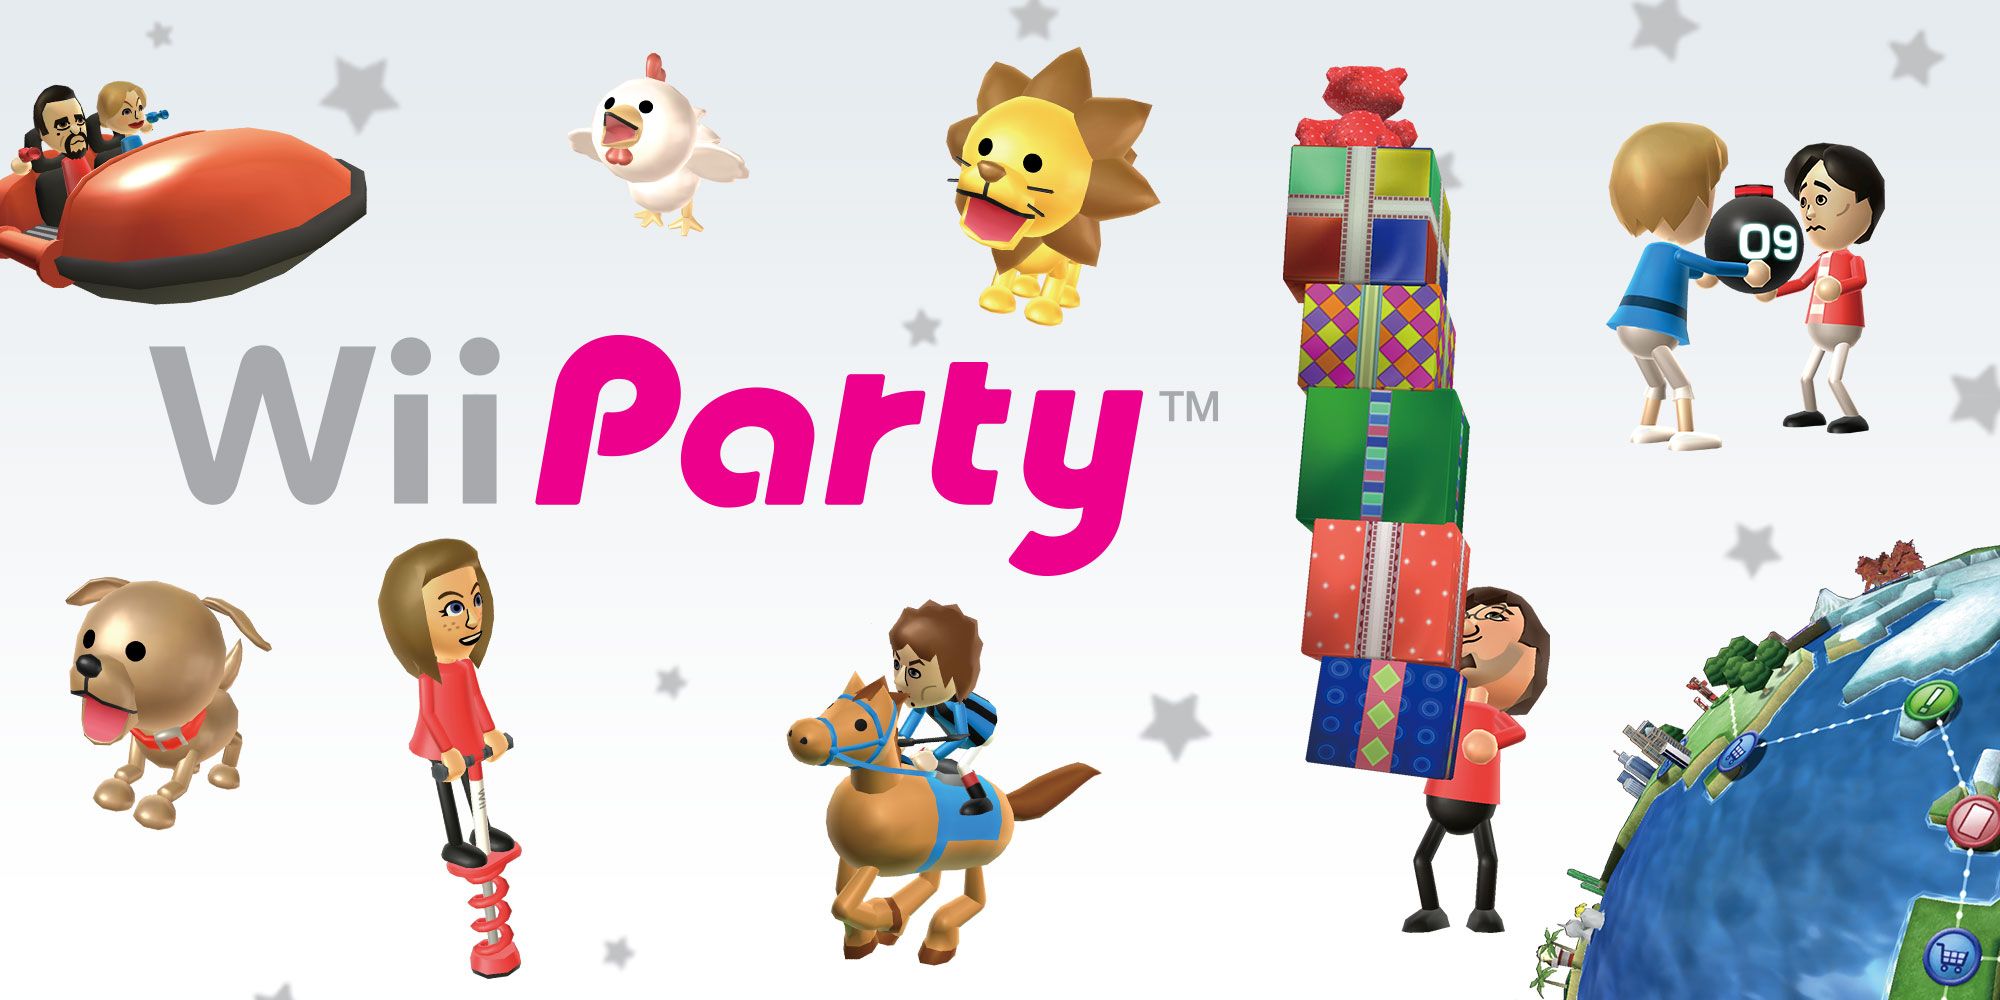 Wii Party game banner for the Wii